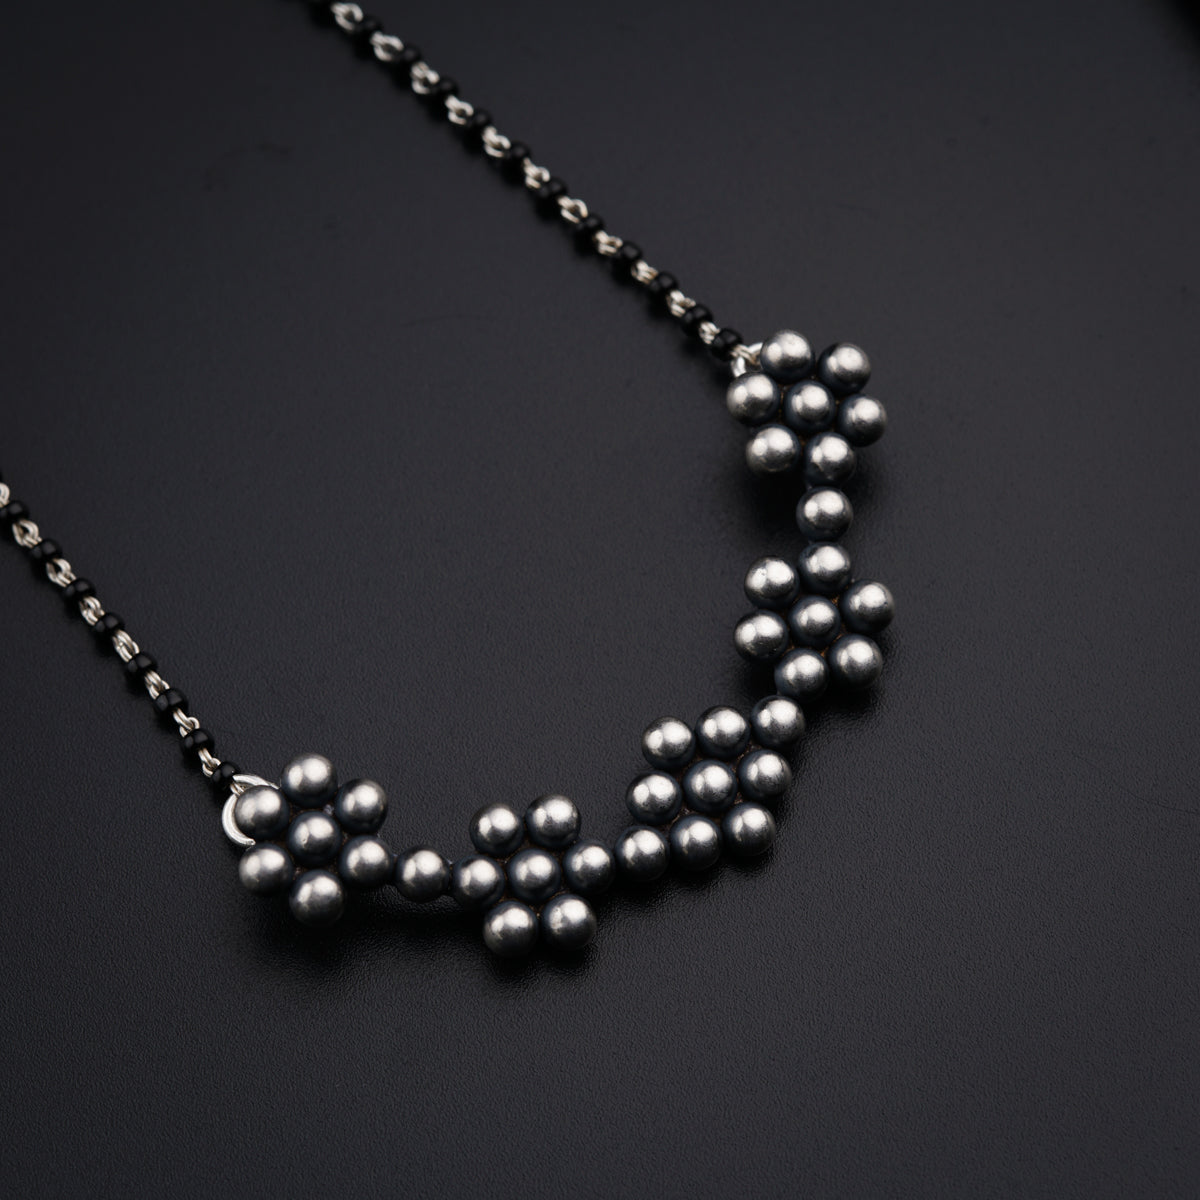 a necklace made of silver balls on a black surface